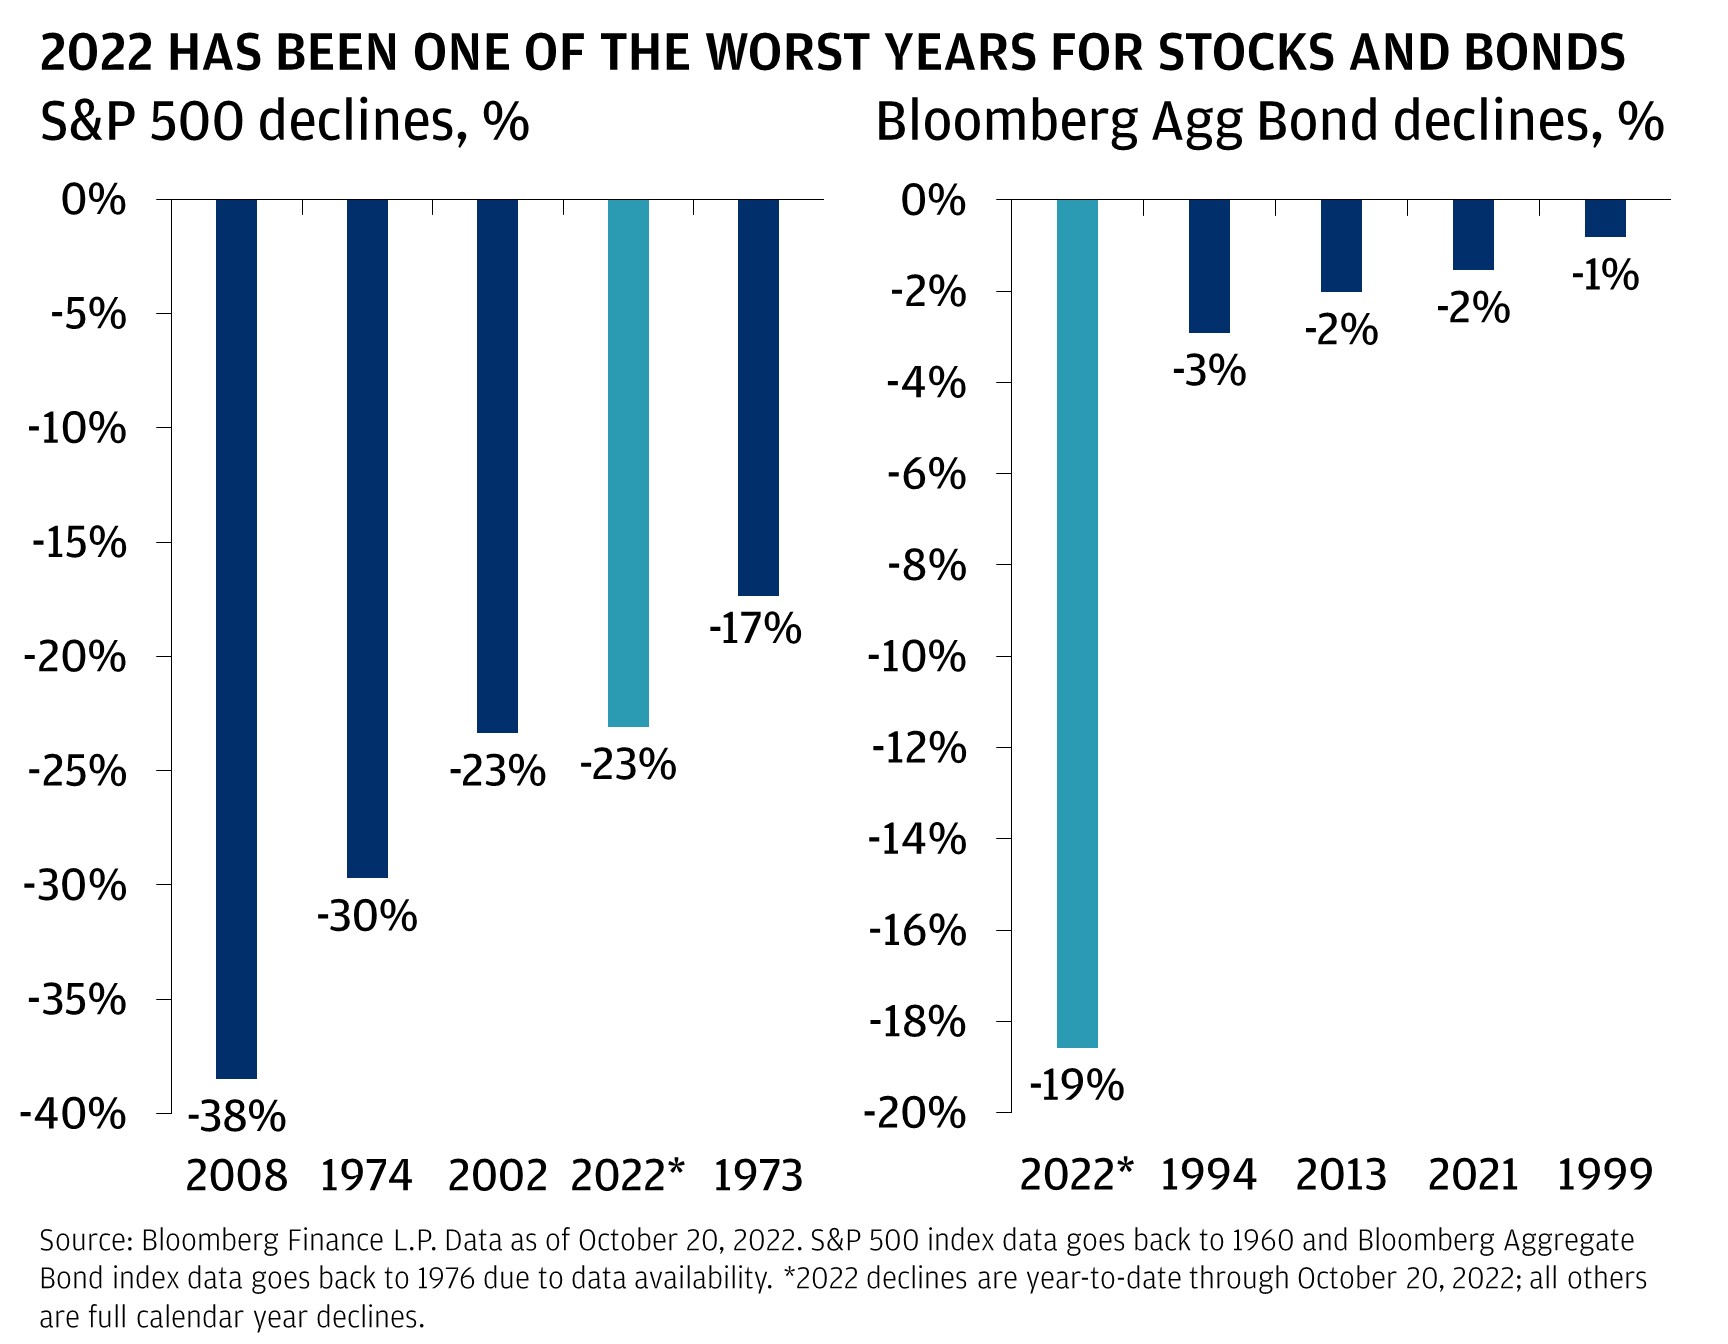 This chart shows the worst calendar year declines for S&P 500 and Bloomberg Agg Bond.